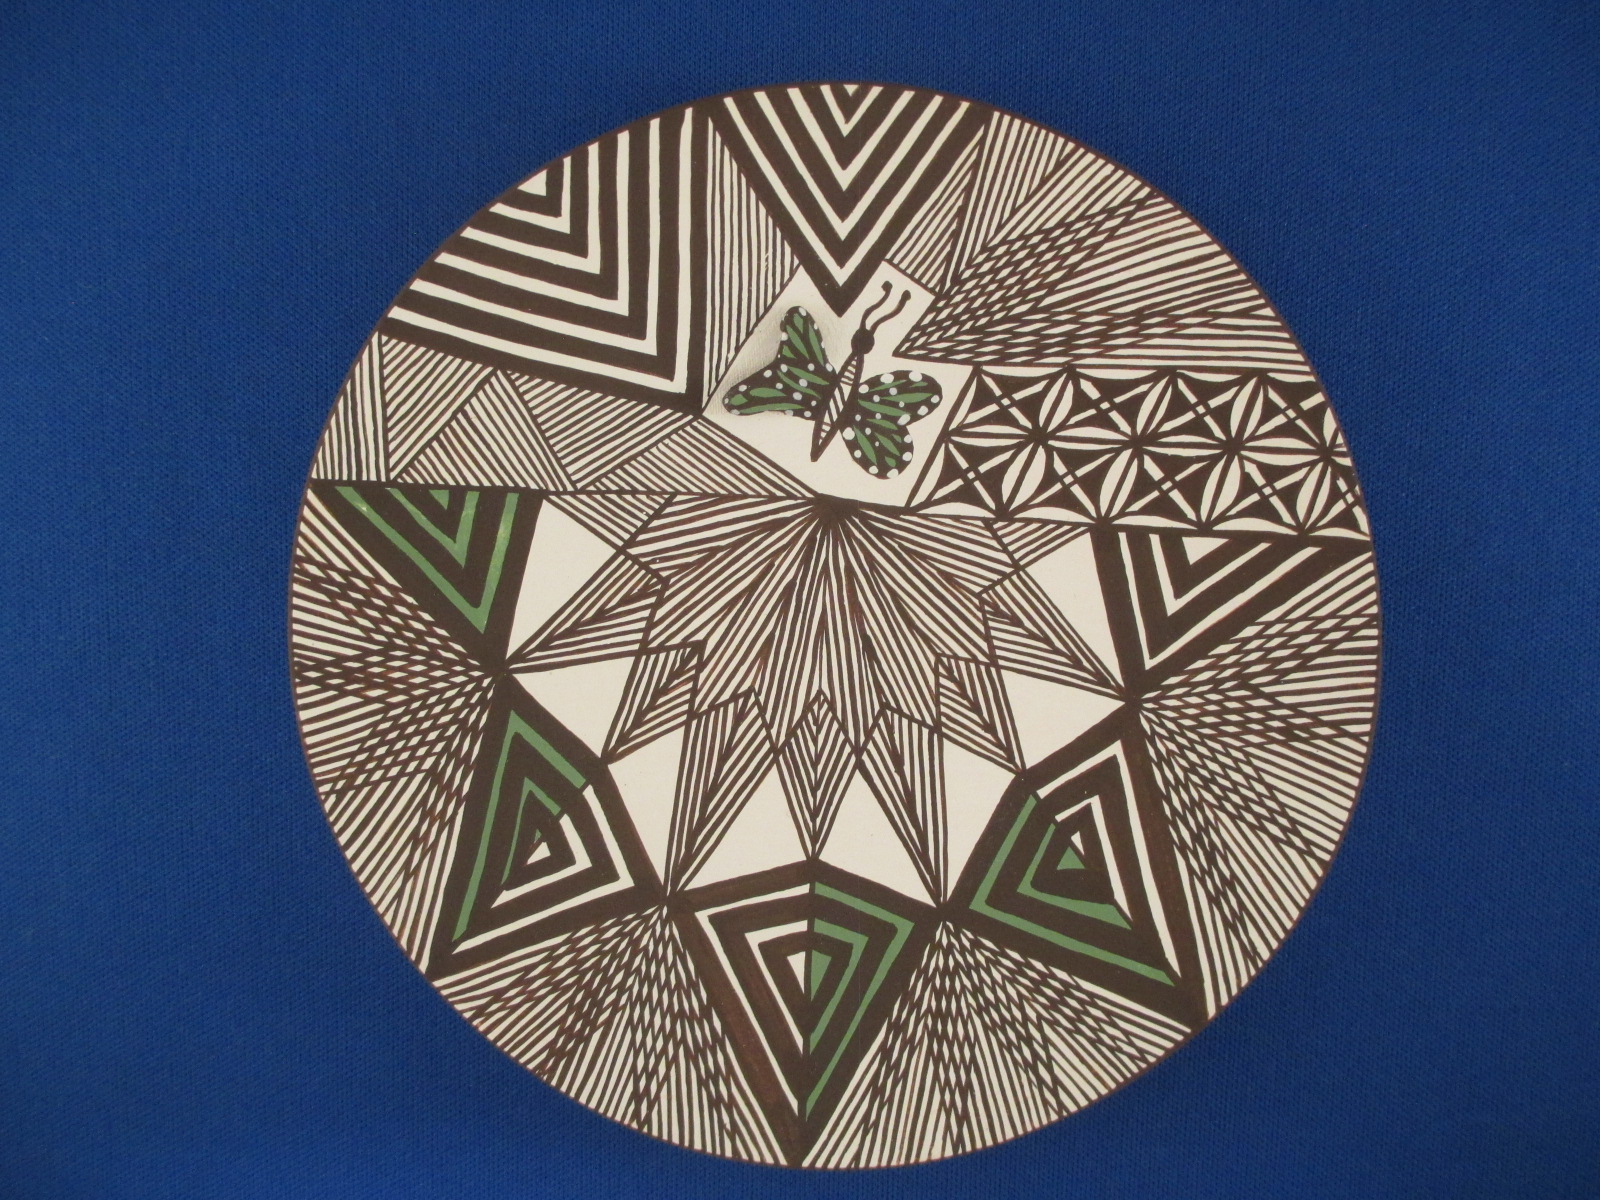 Native American Pottery - Acoma Pottery Plate with Butterfly by Acoma Pueblo Indian potter, Alisha Sanchez FOR SALE $350-